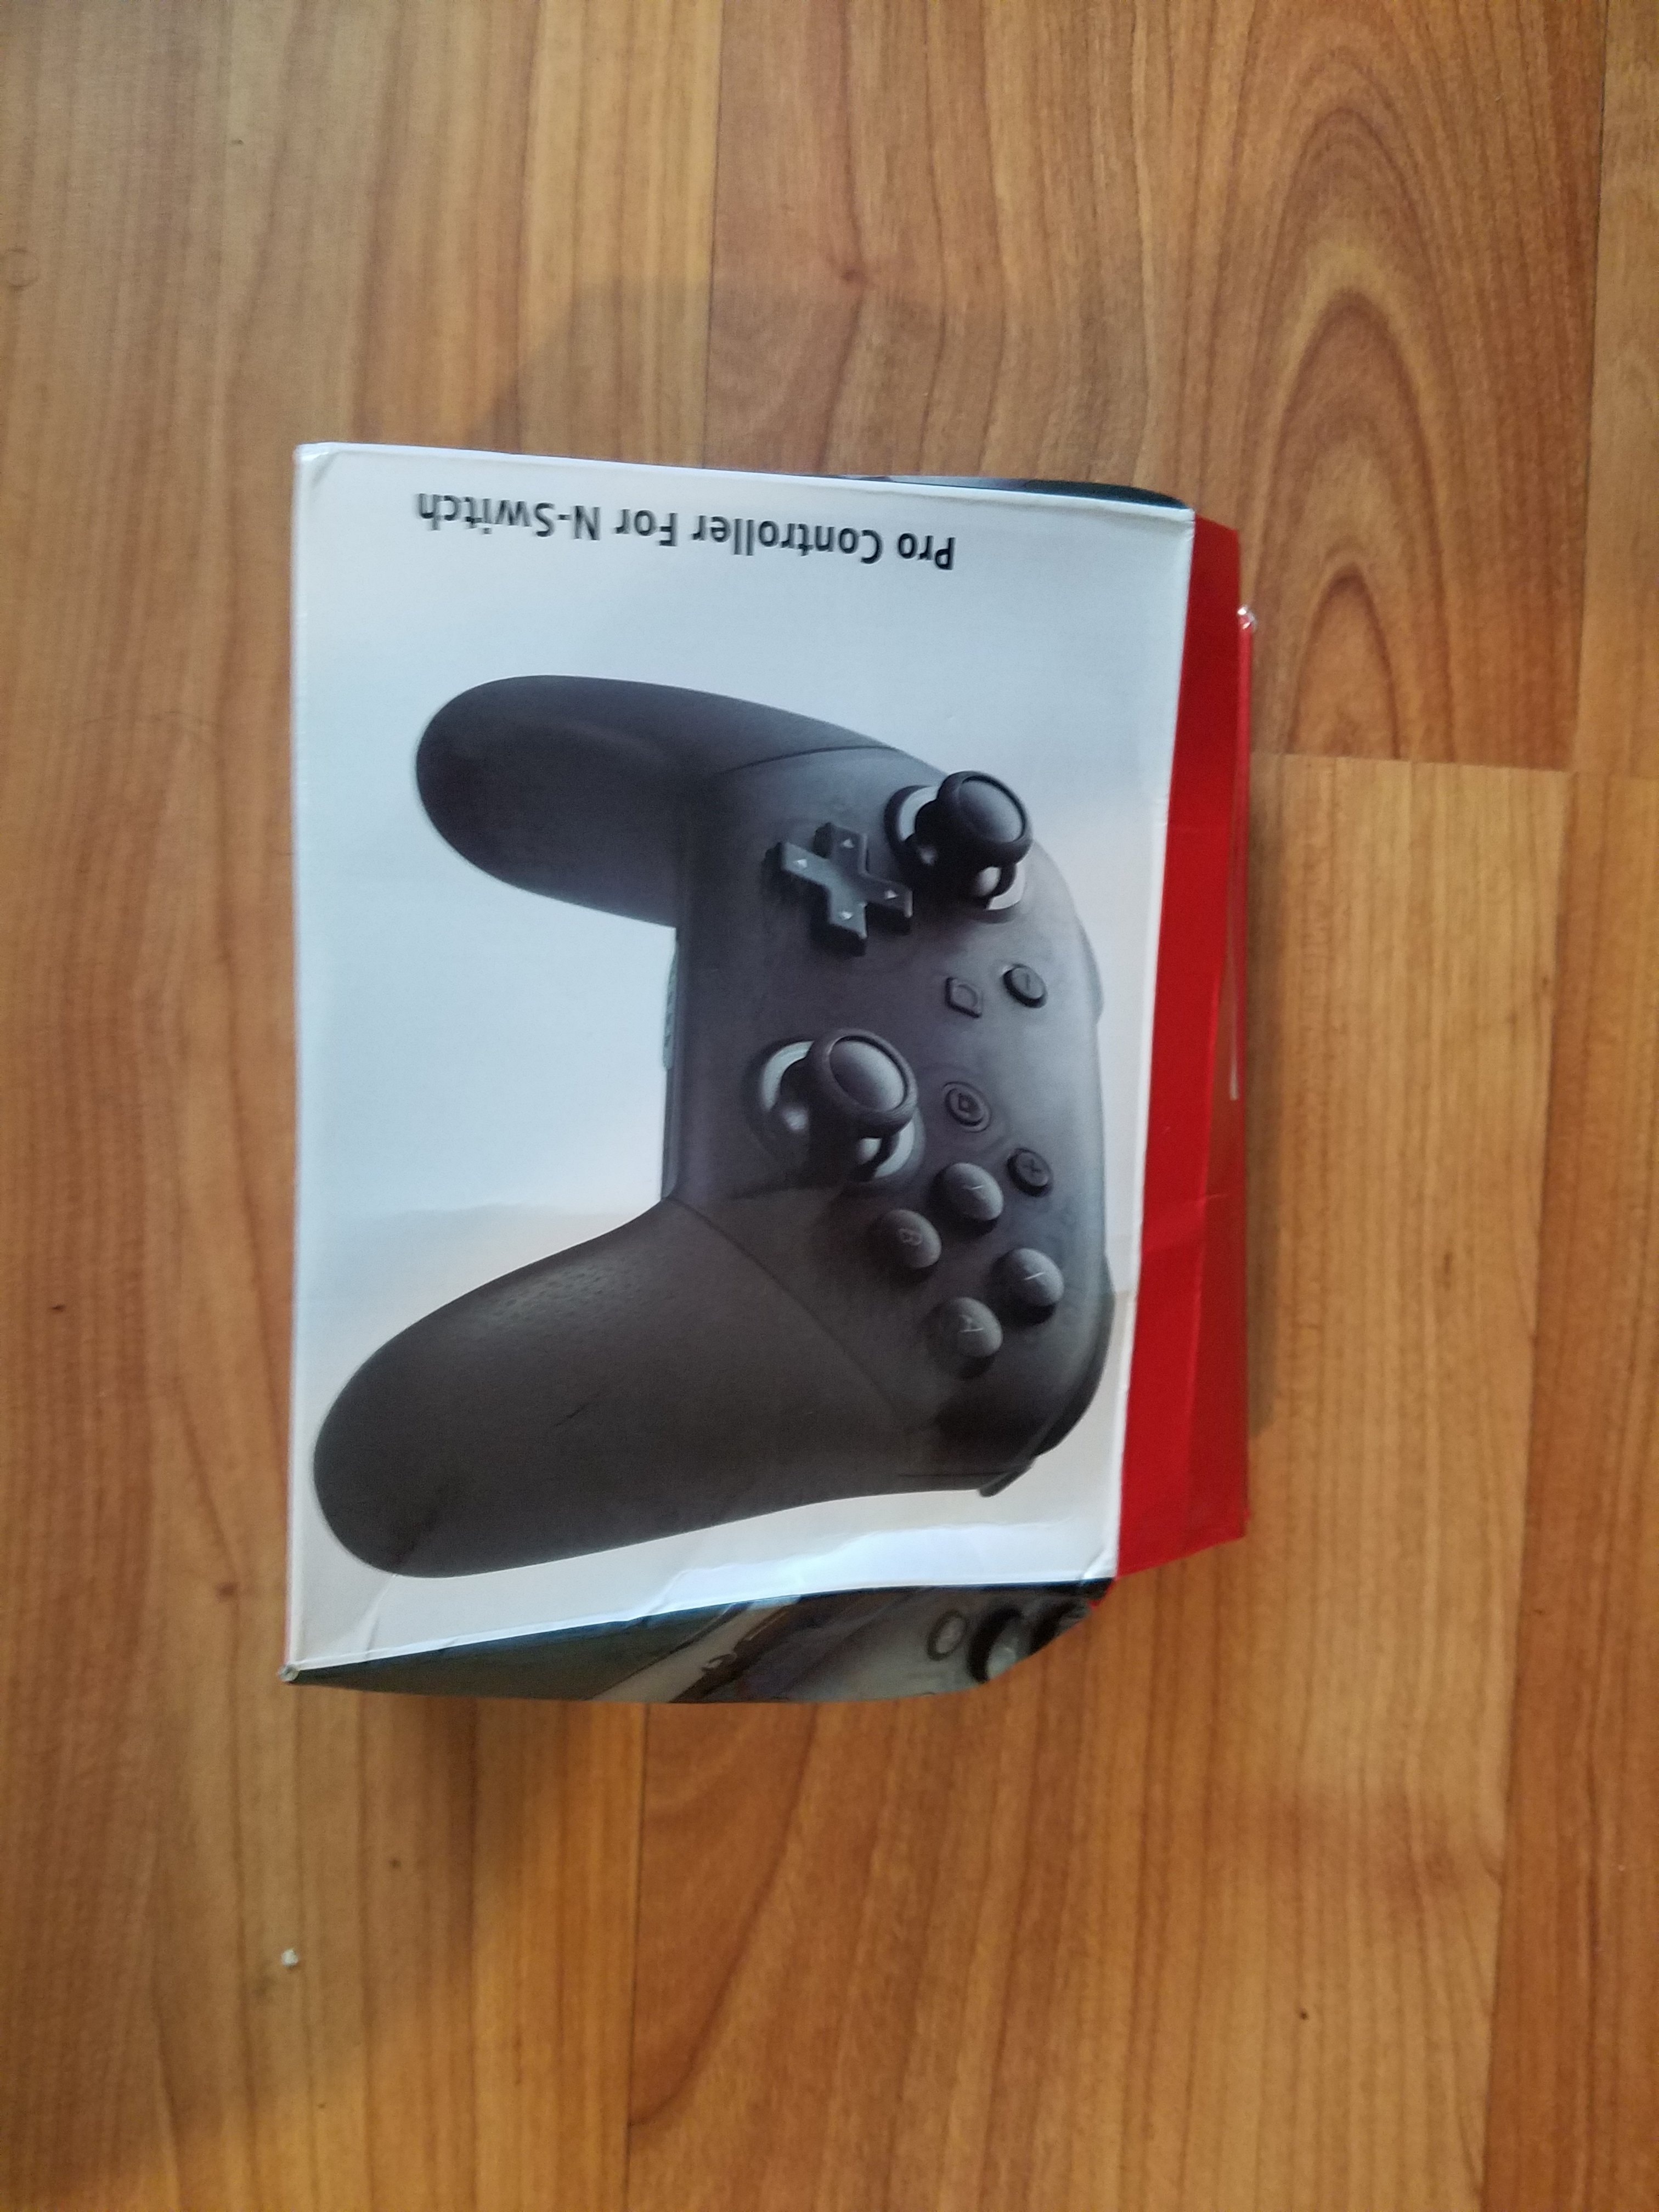 Fake Pro Controller Gbatemp Net The Independent Video Game Community